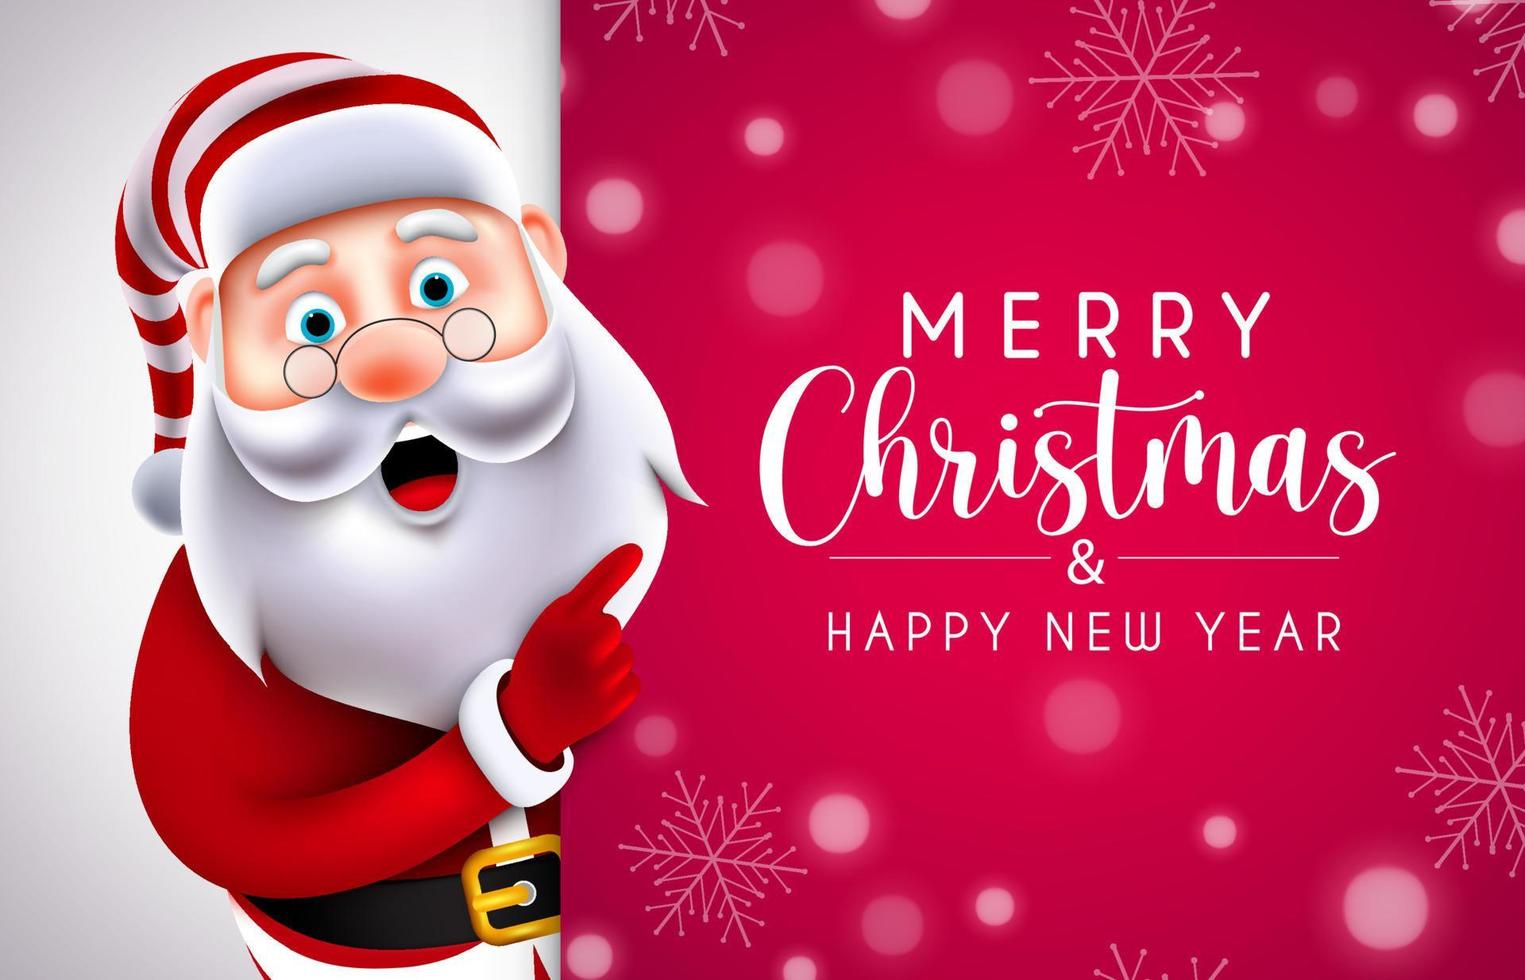 Christmas greeting vector template design. Merry christmas text in red empty space background with santa claus character for xmas celebration card. Vector illustration